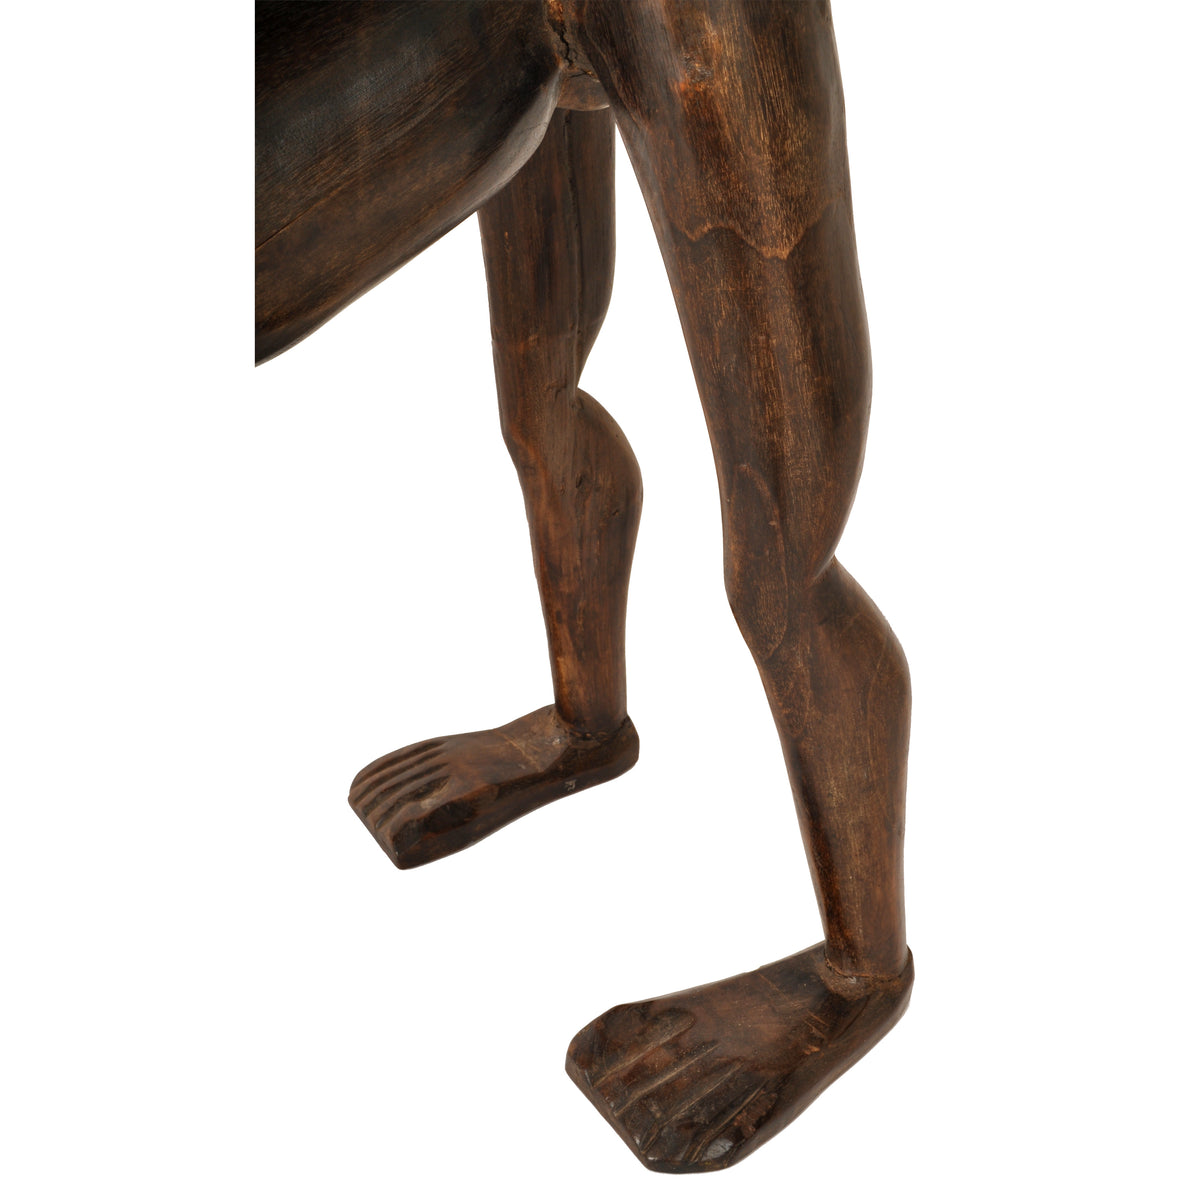 Antique West African Benin Tribal Yoruba Carved Figural Ceremonial Table / Stool, circa 1920